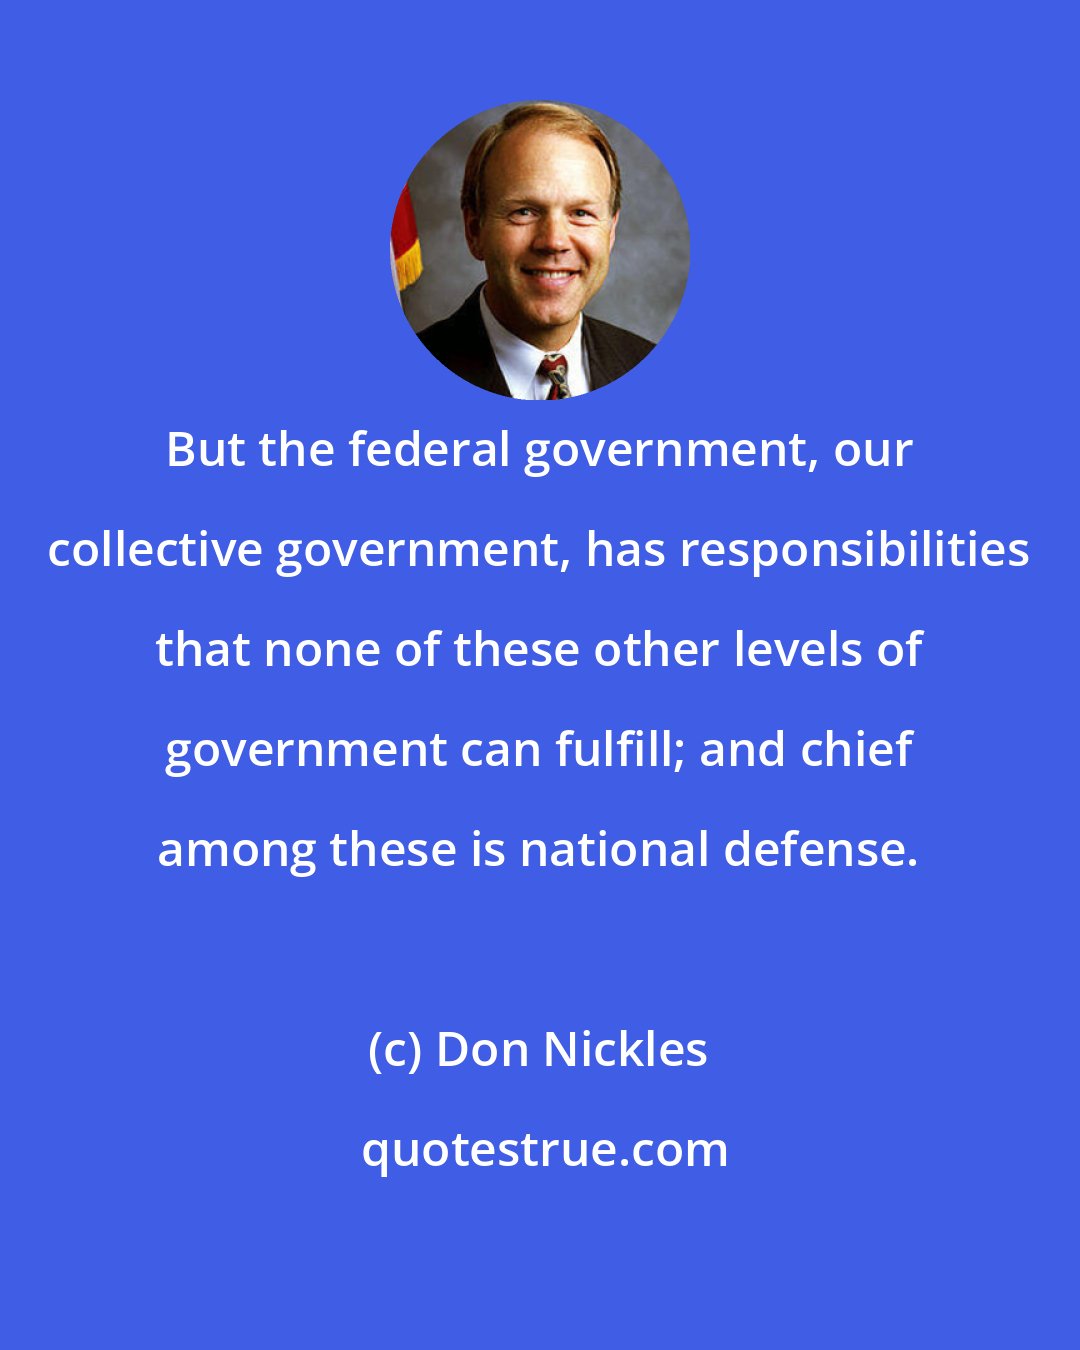 Don Nickles: But the federal government, our collective government, has responsibilities that none of these other levels of government can fulfill; and chief among these is national defense.